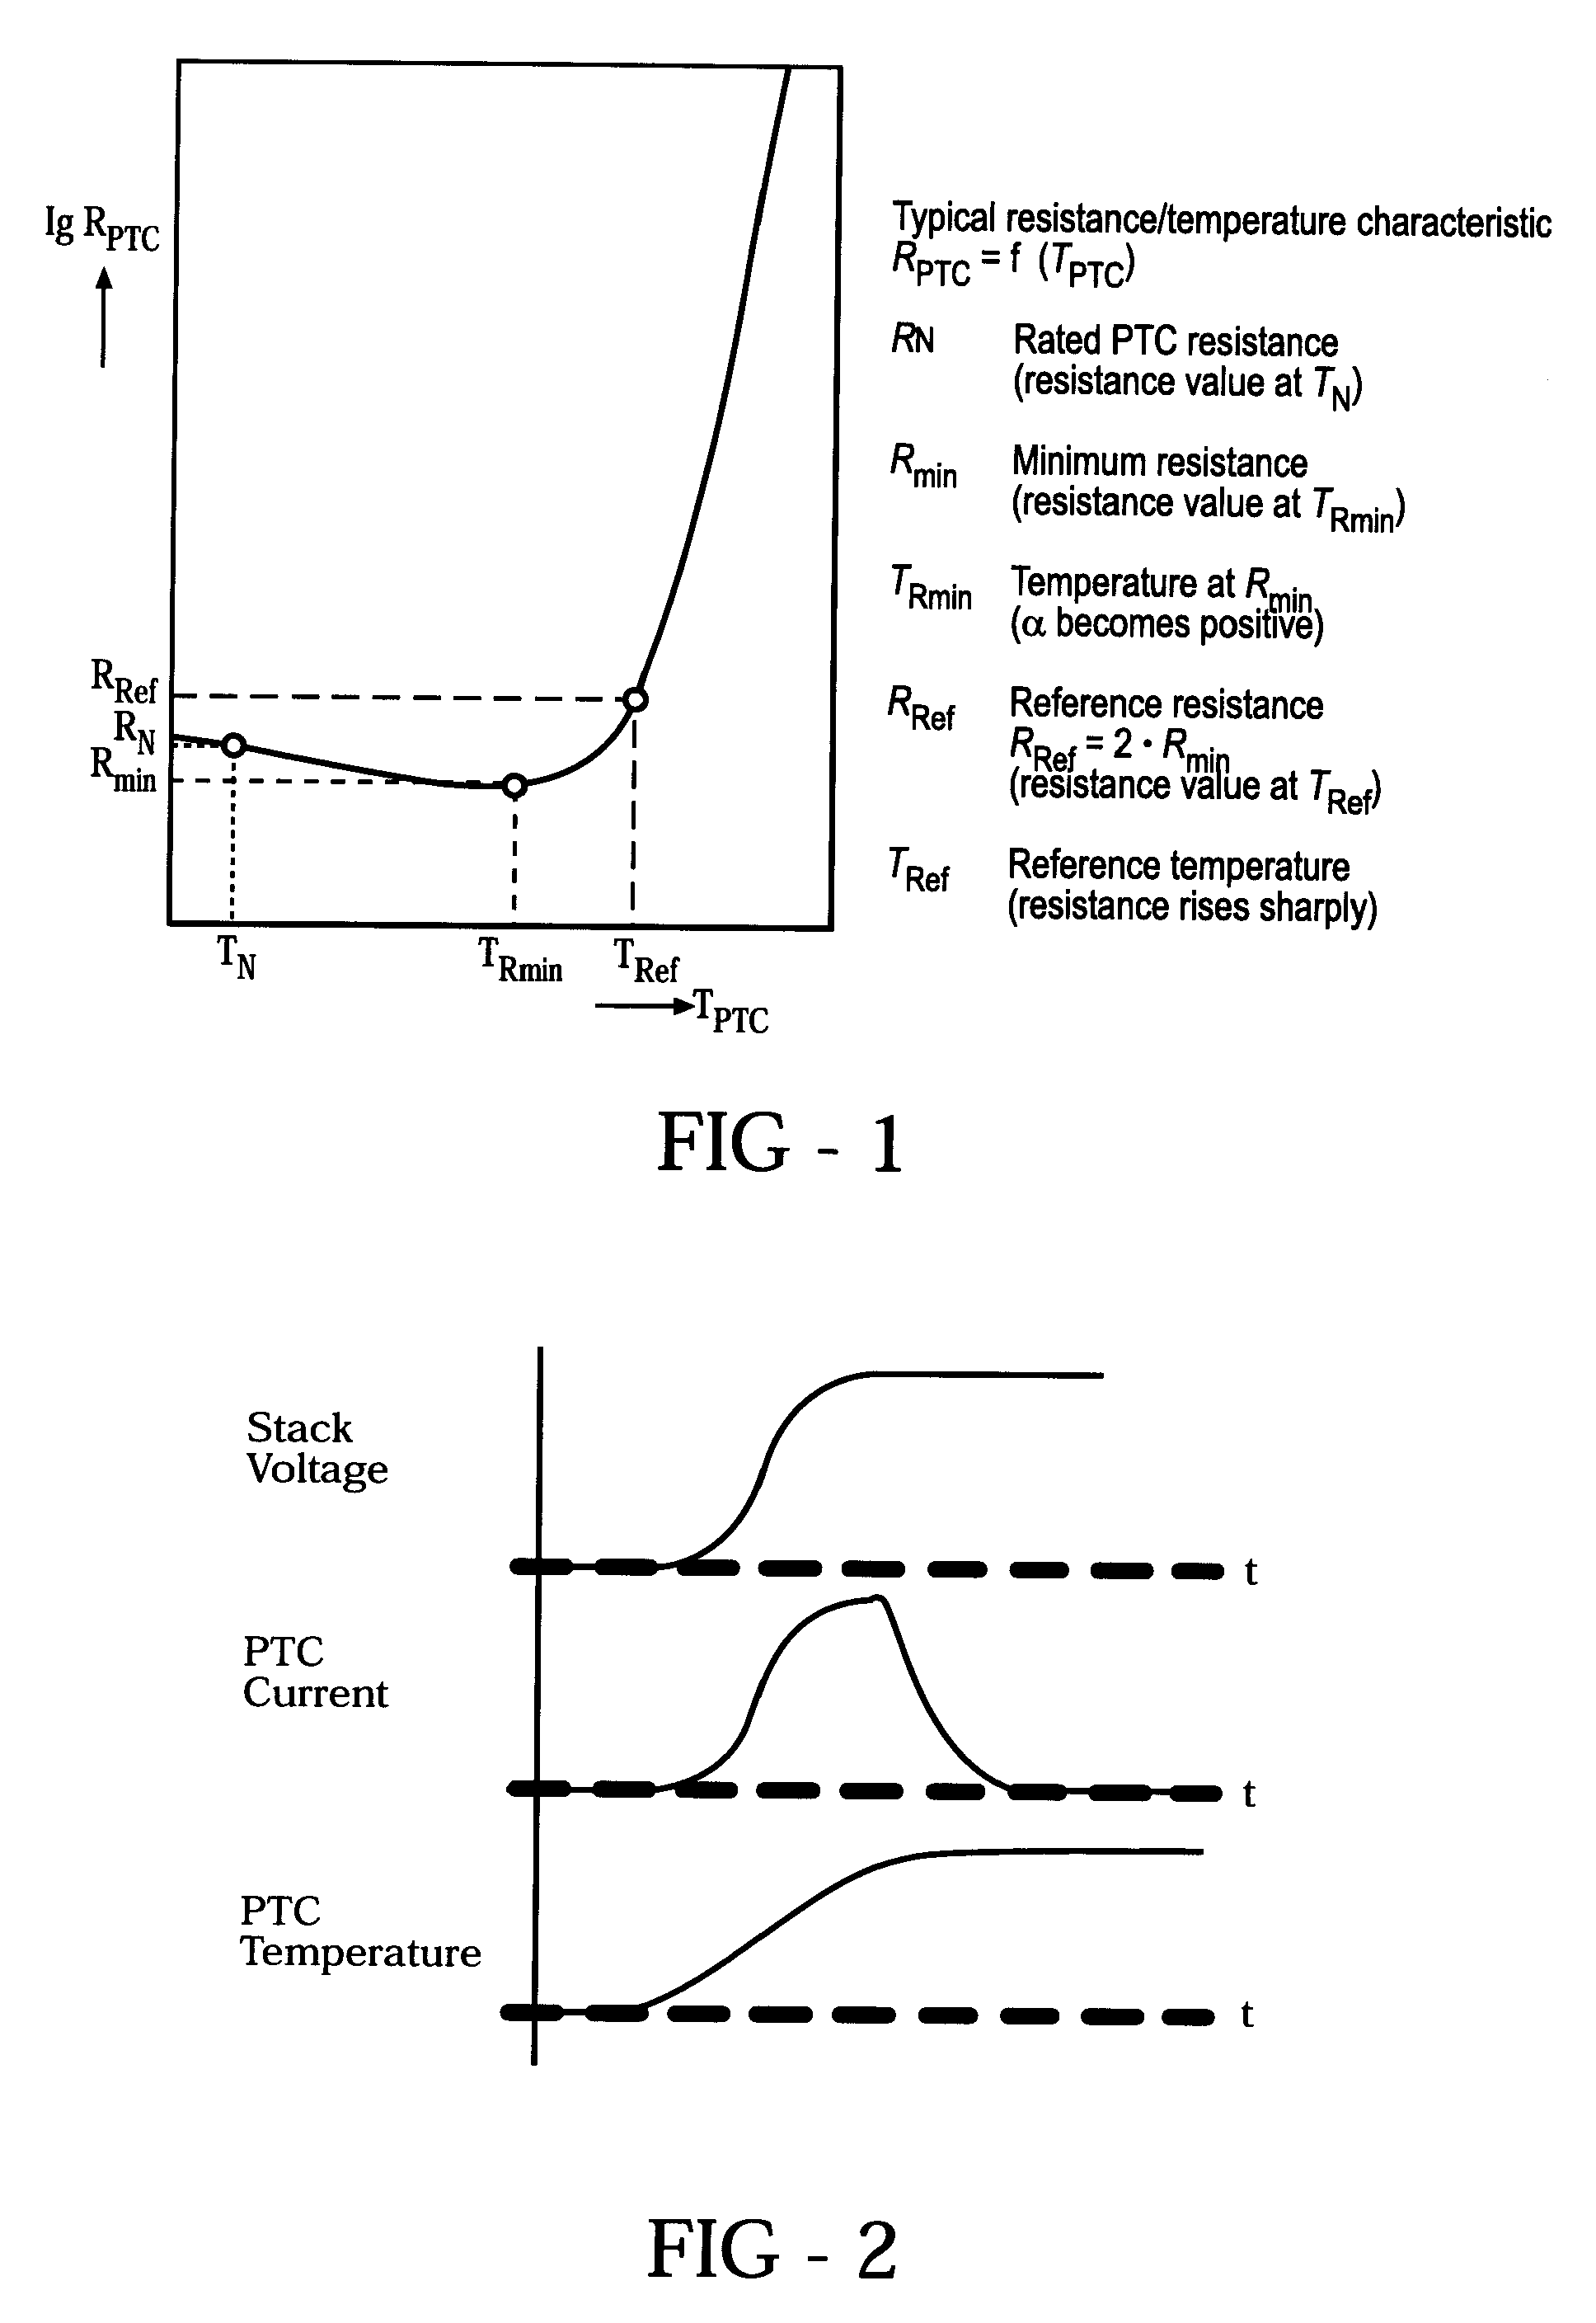 PTC element as a self regulating start resistor for a fuel cell stack